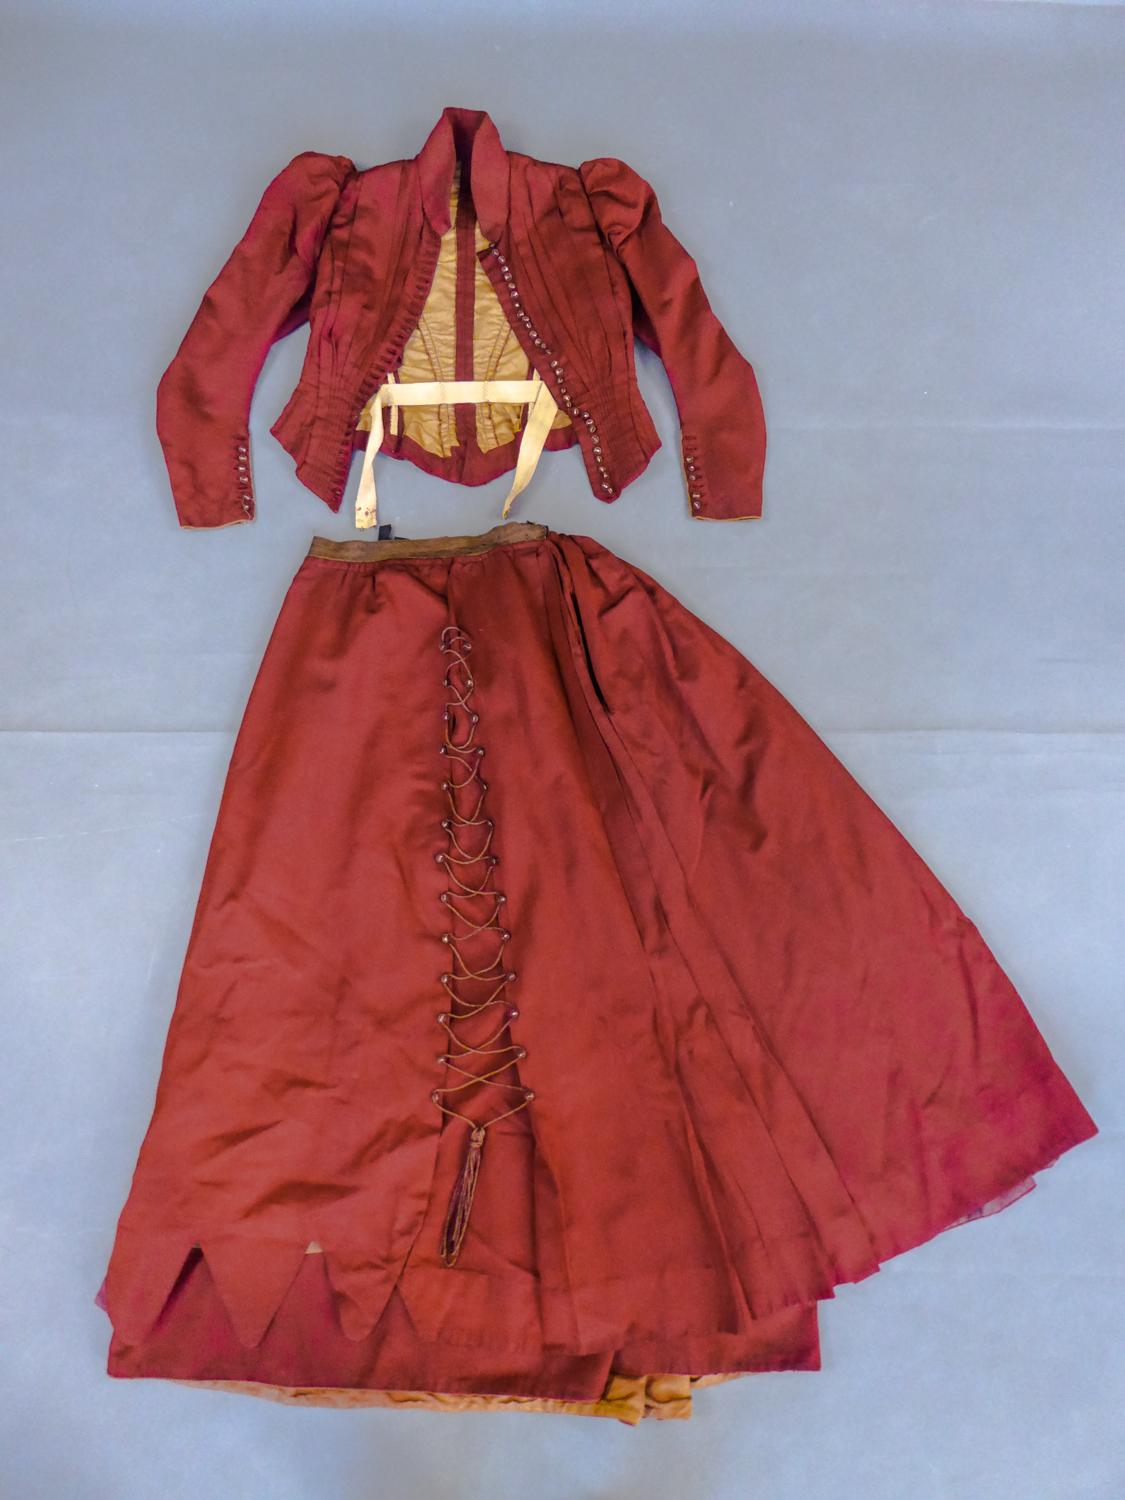 Circa 1895/1900
England
 
A deep red faille or ottoman silk set with bodice and skirt for riding during the Belle Epoque. Fitted boned bodice with small basques and long shaped sleeves with small gigot at the shoulders. Work of sewn pleats at the